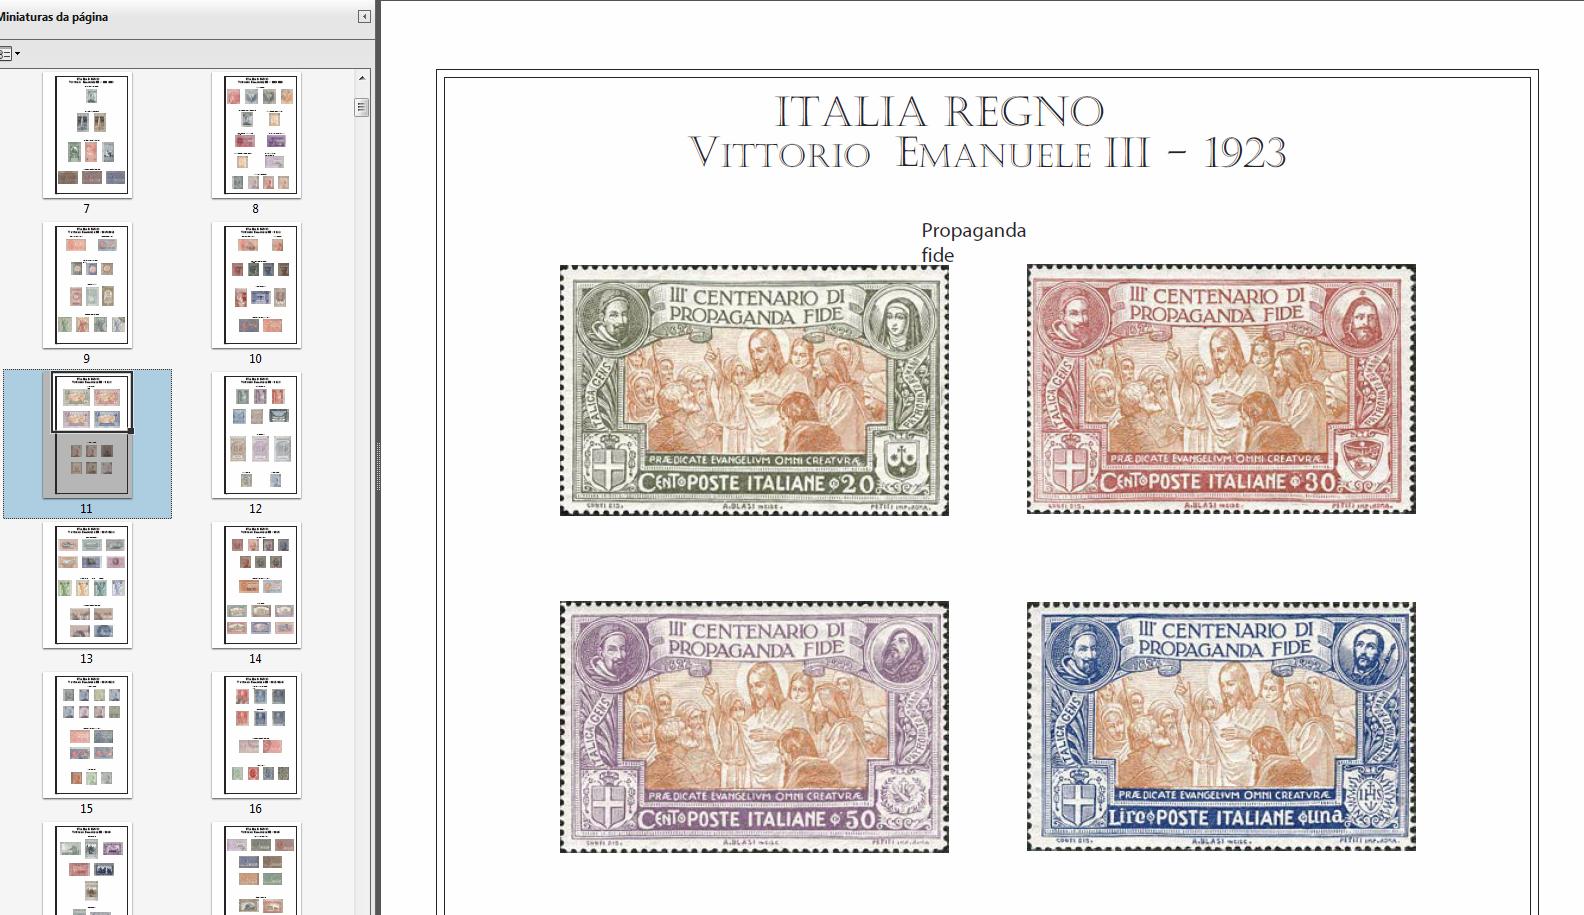 italy-stamp-album-pages-cd-1861-2011-459-pdf-color-illustrated-pages